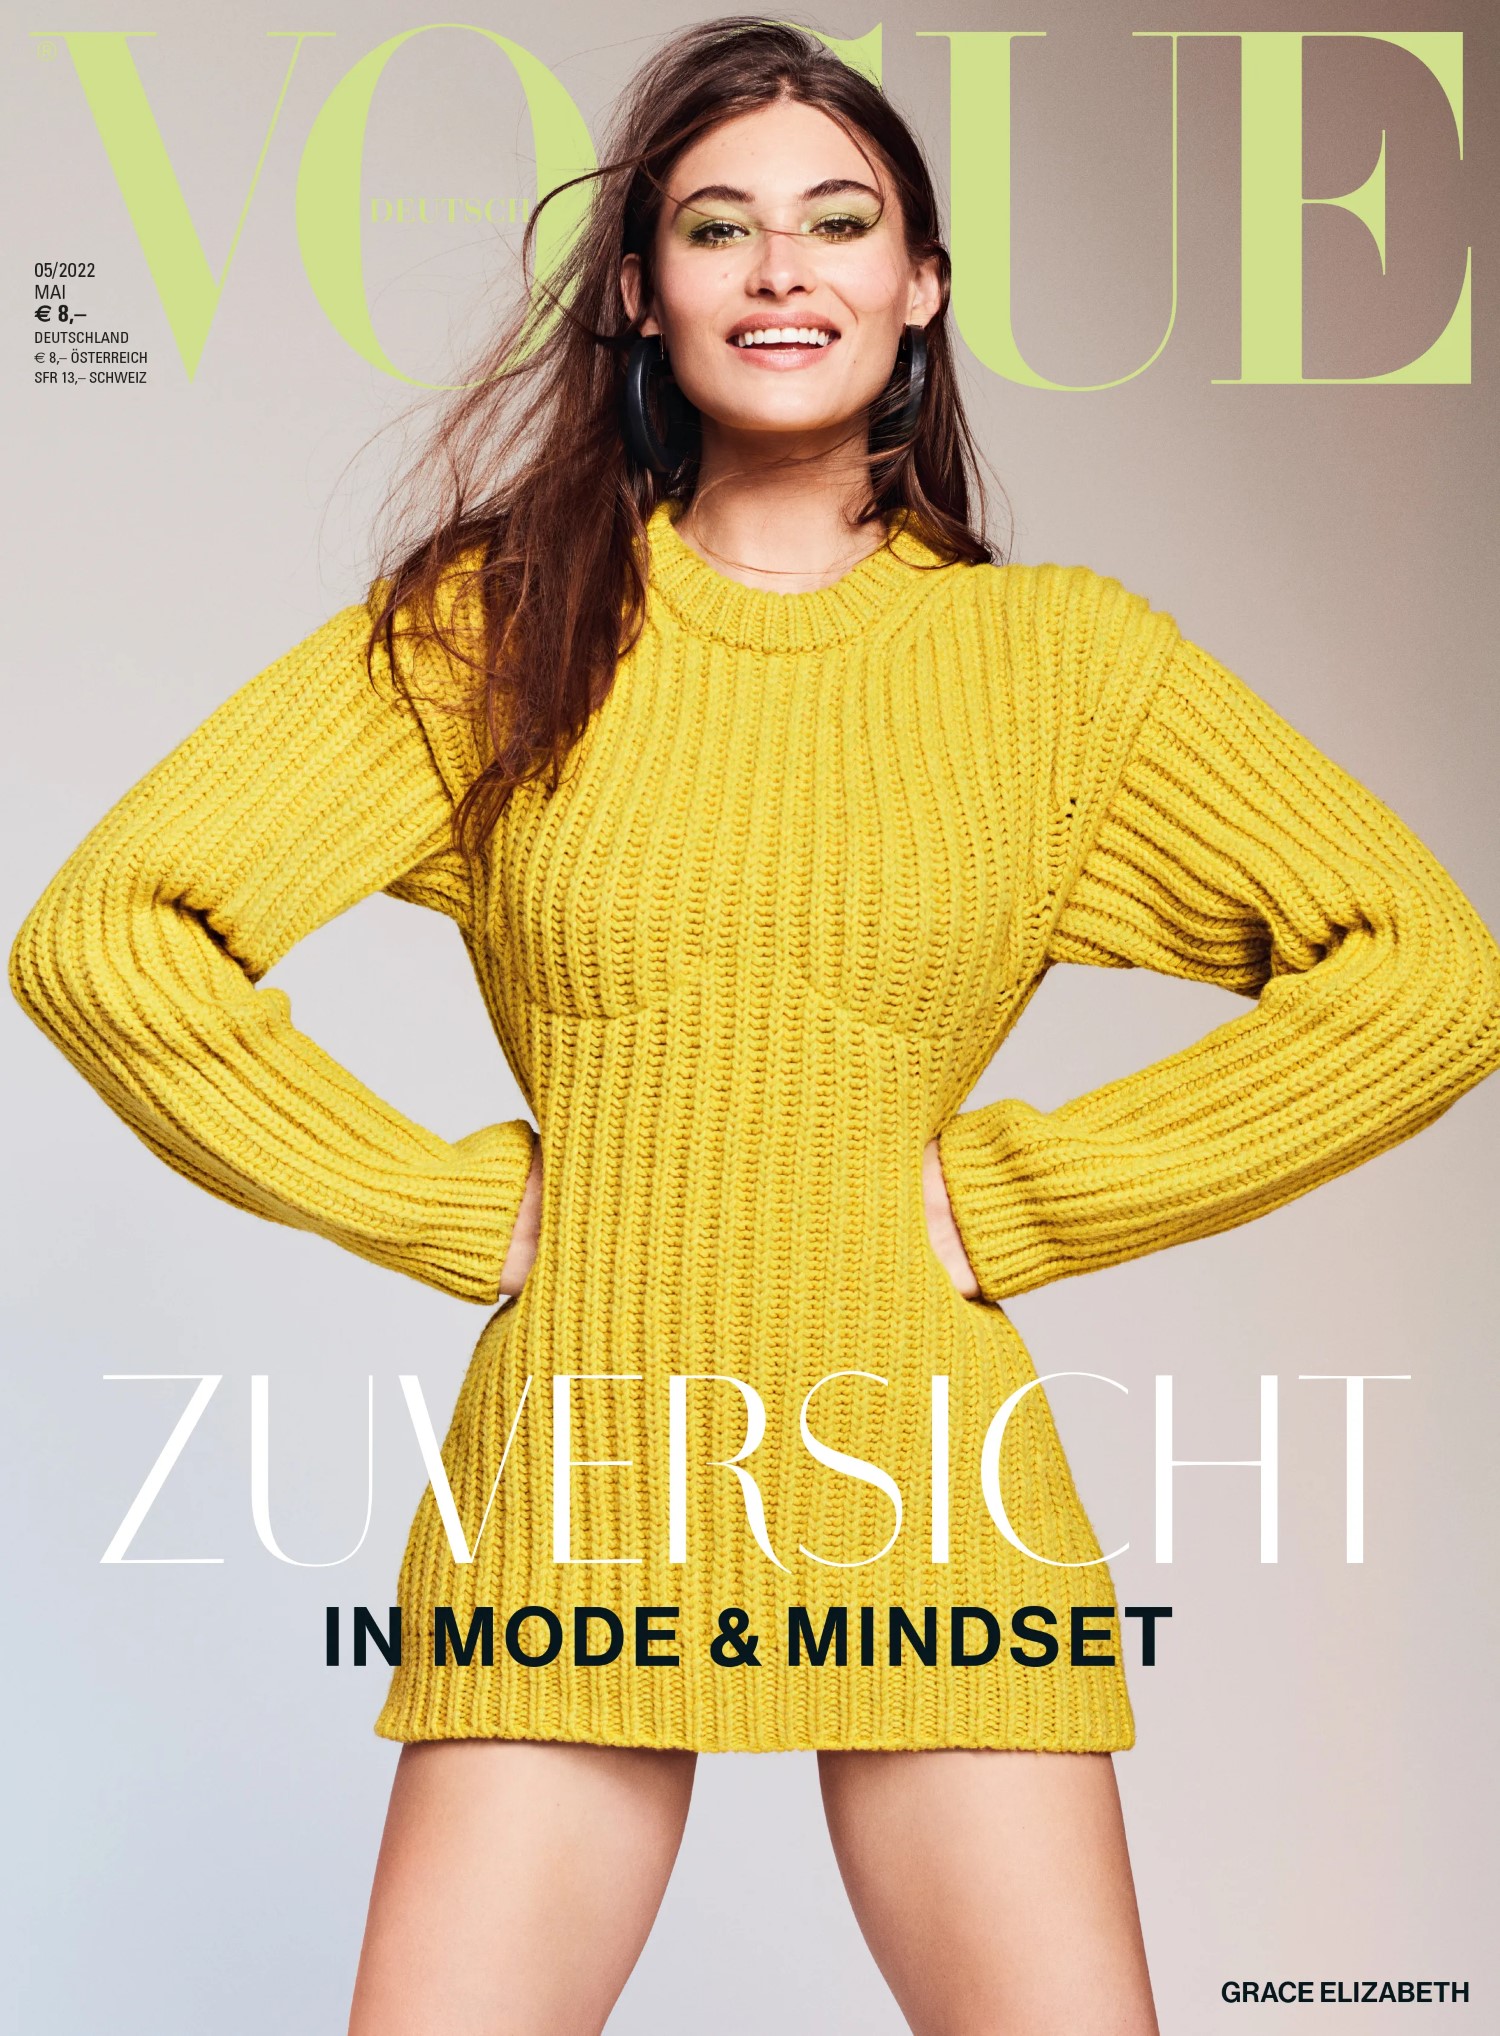 Grace Elizabeth covers Vogue Germany May 2022 by Paul Wetherell